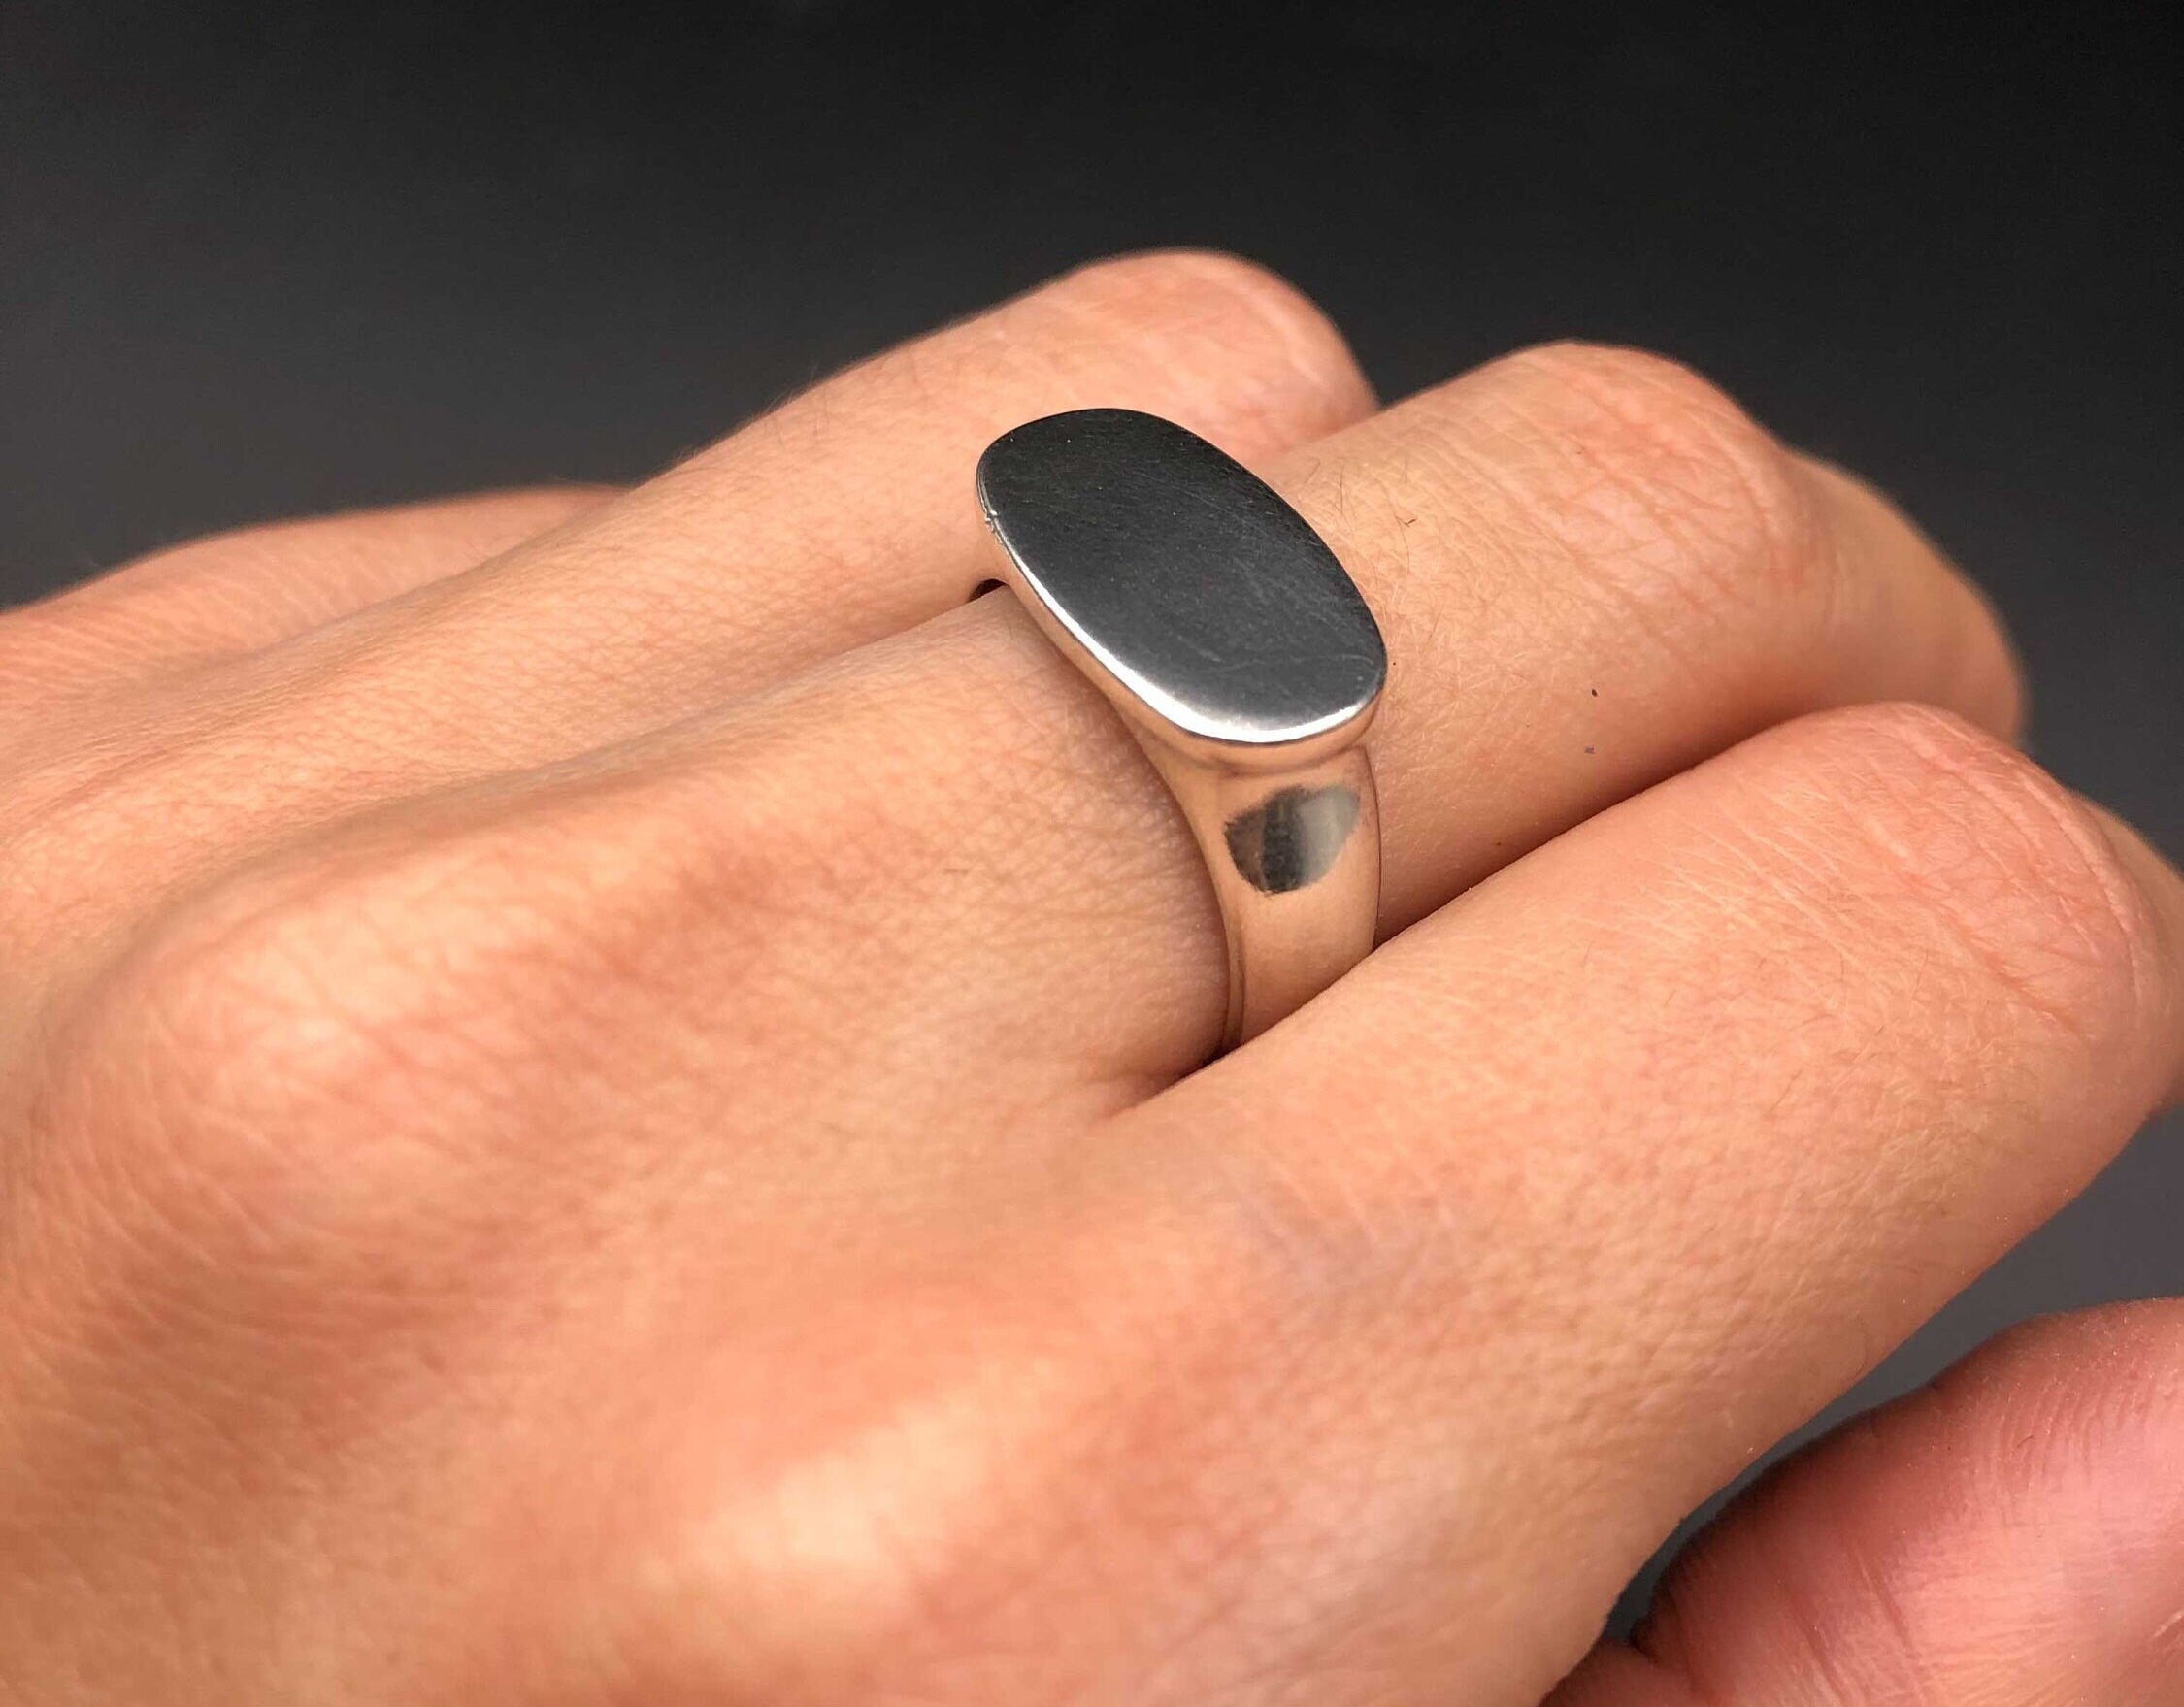 Large Signet Ring, Flat Top Silver Ring, Sturdy Ring, Solid Silver Ring, Unisex Ring, Ring for Engraving, Wide Band, 925 Sterling Silver